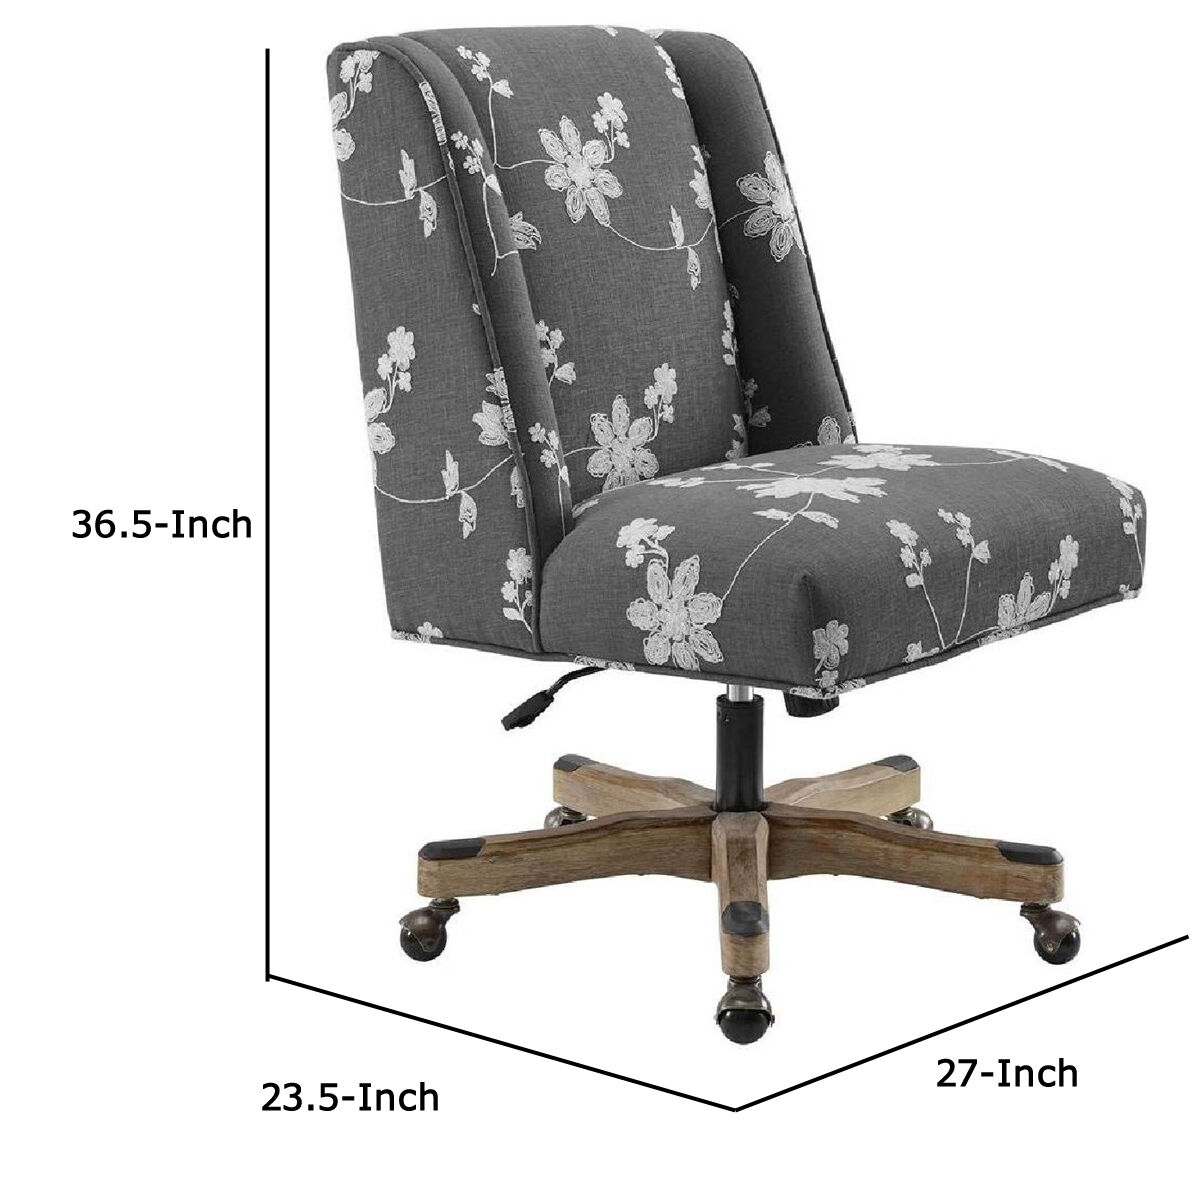 Floral Embroidered Fabric Upholstered Office Chair, Gray and White